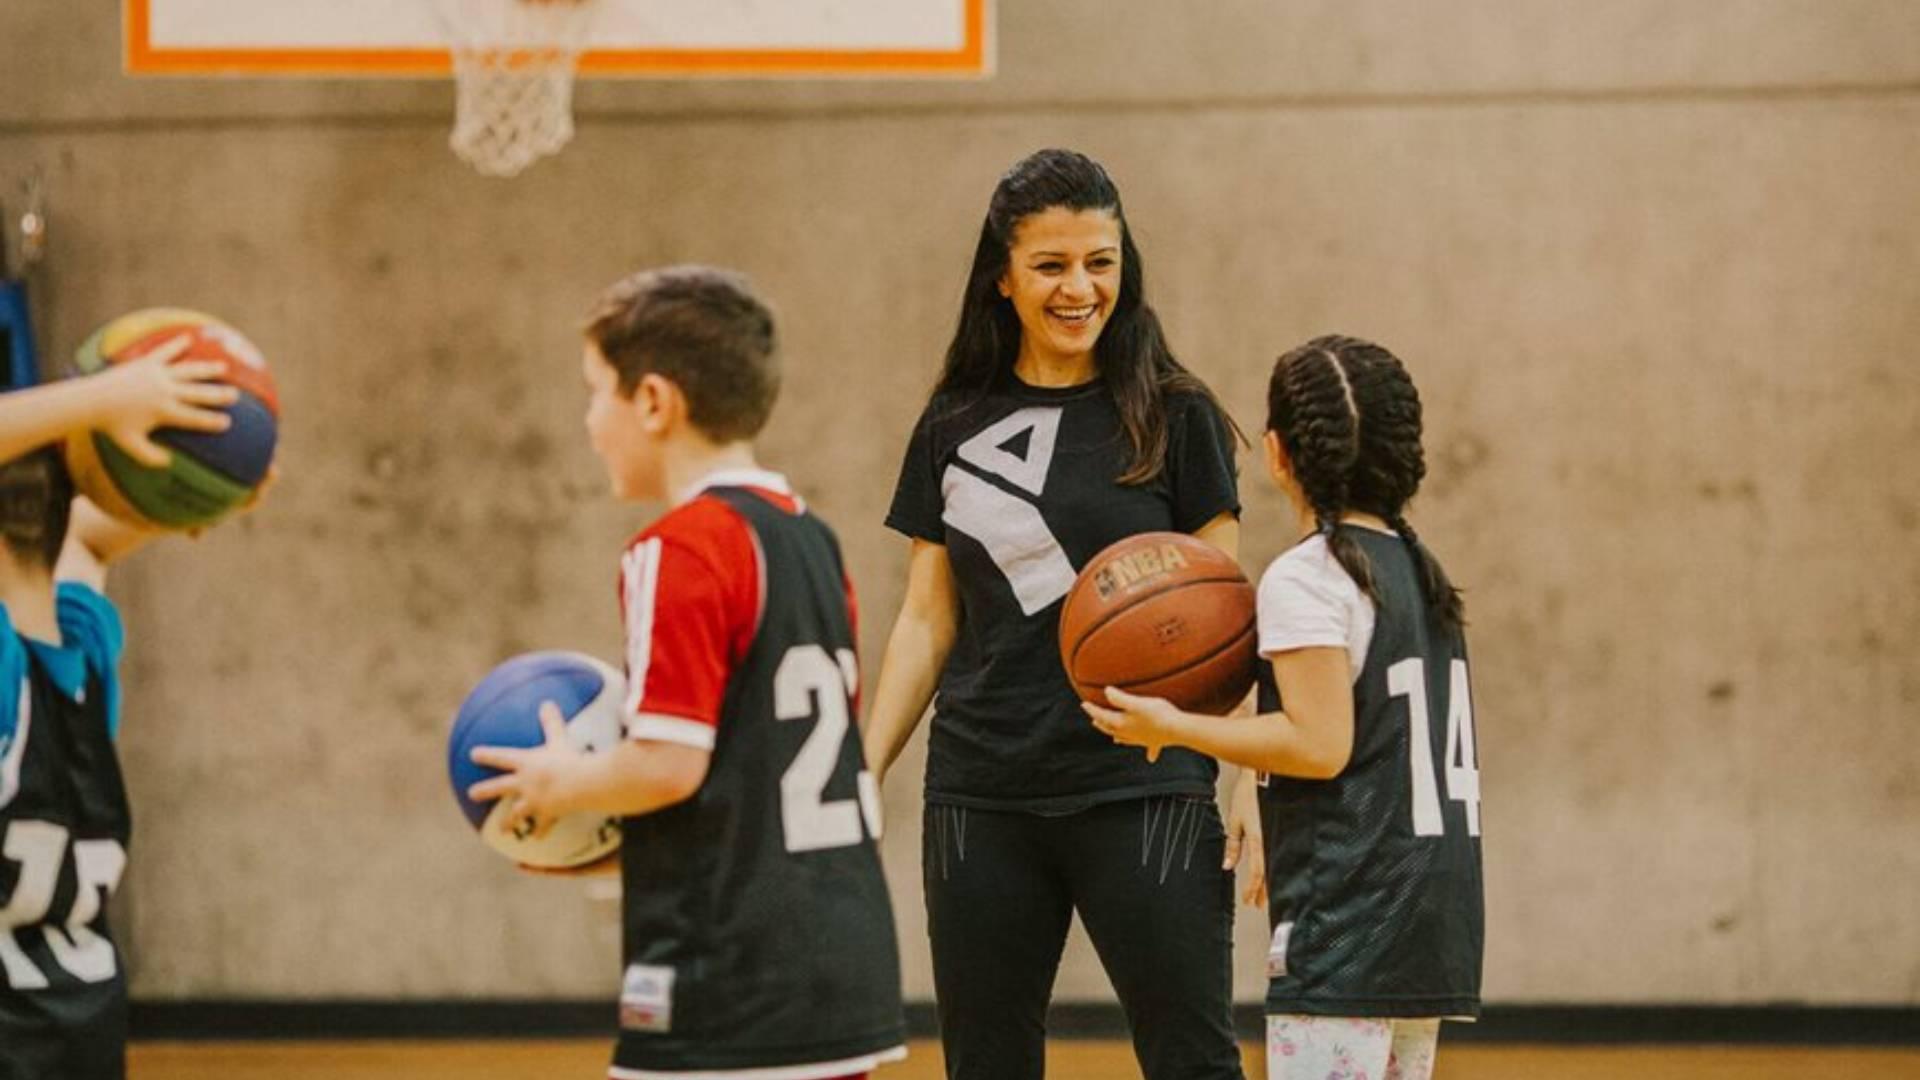 YMCA sports leagues for children and youth in Greater Vancouver